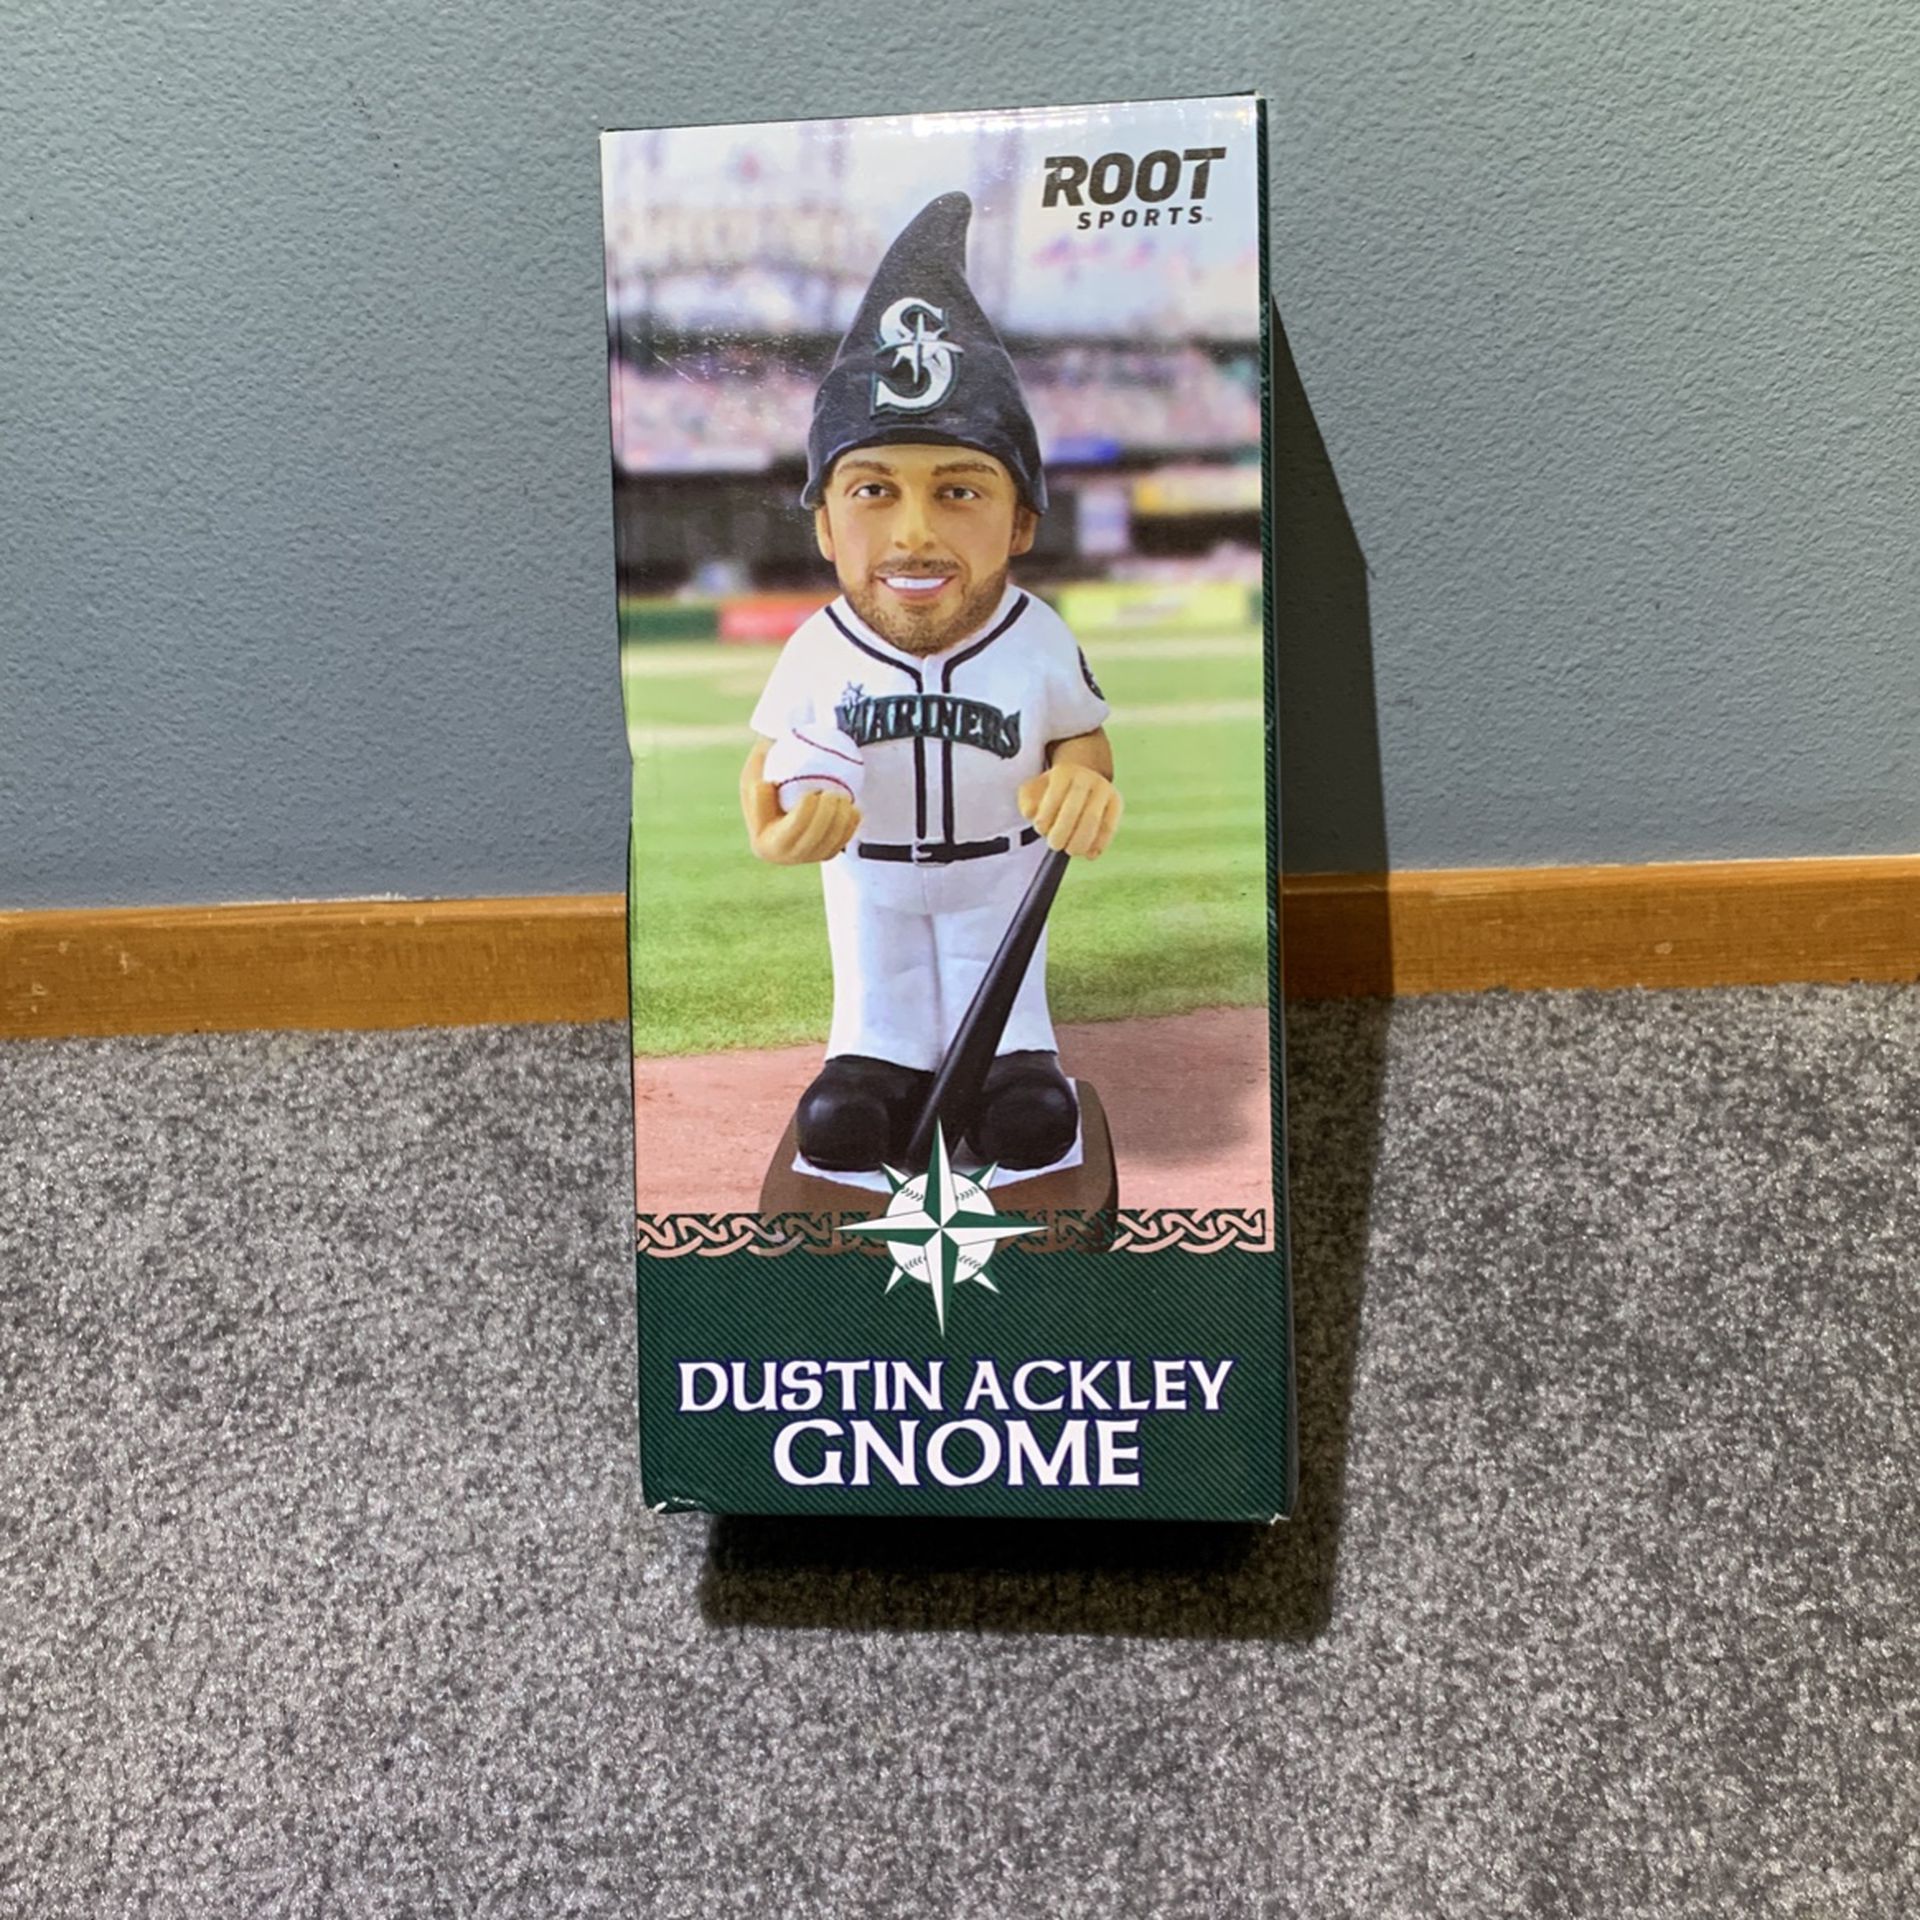 Seattle Mariners Dustin Ackley Gnome for Sale in Covington, WA - OfferUp